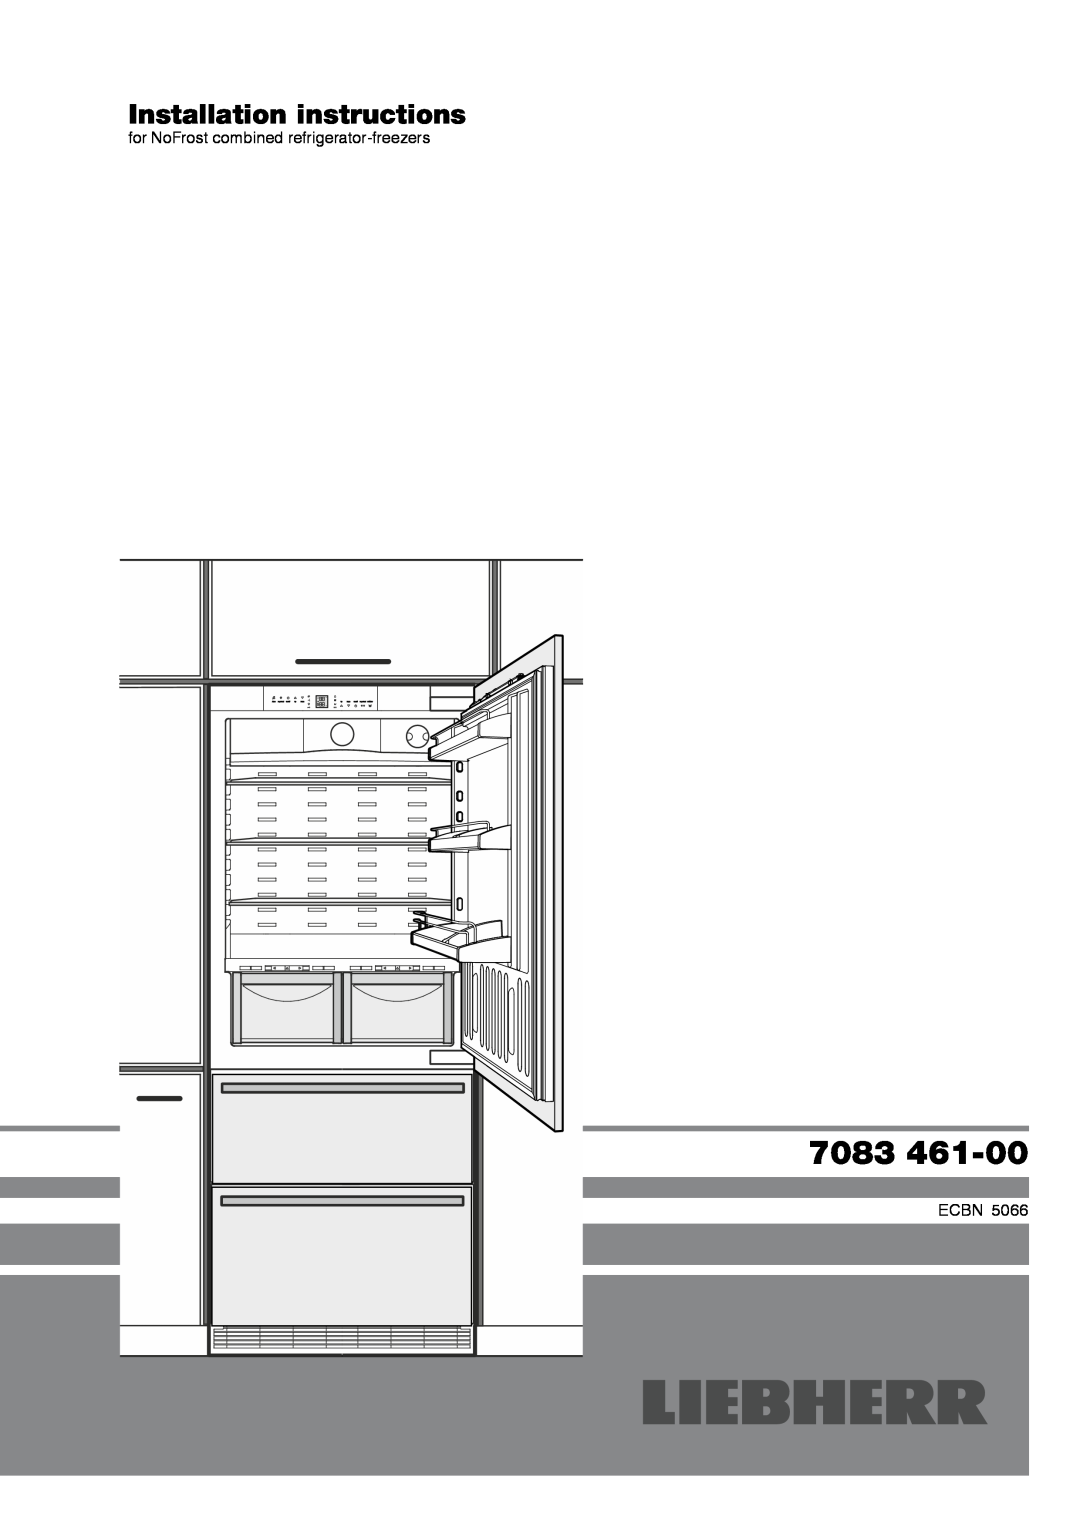 Liebherr 7083 461-00 manual Installation instructions, for NoFrost combined refrigerator-freezers, Ecbn 